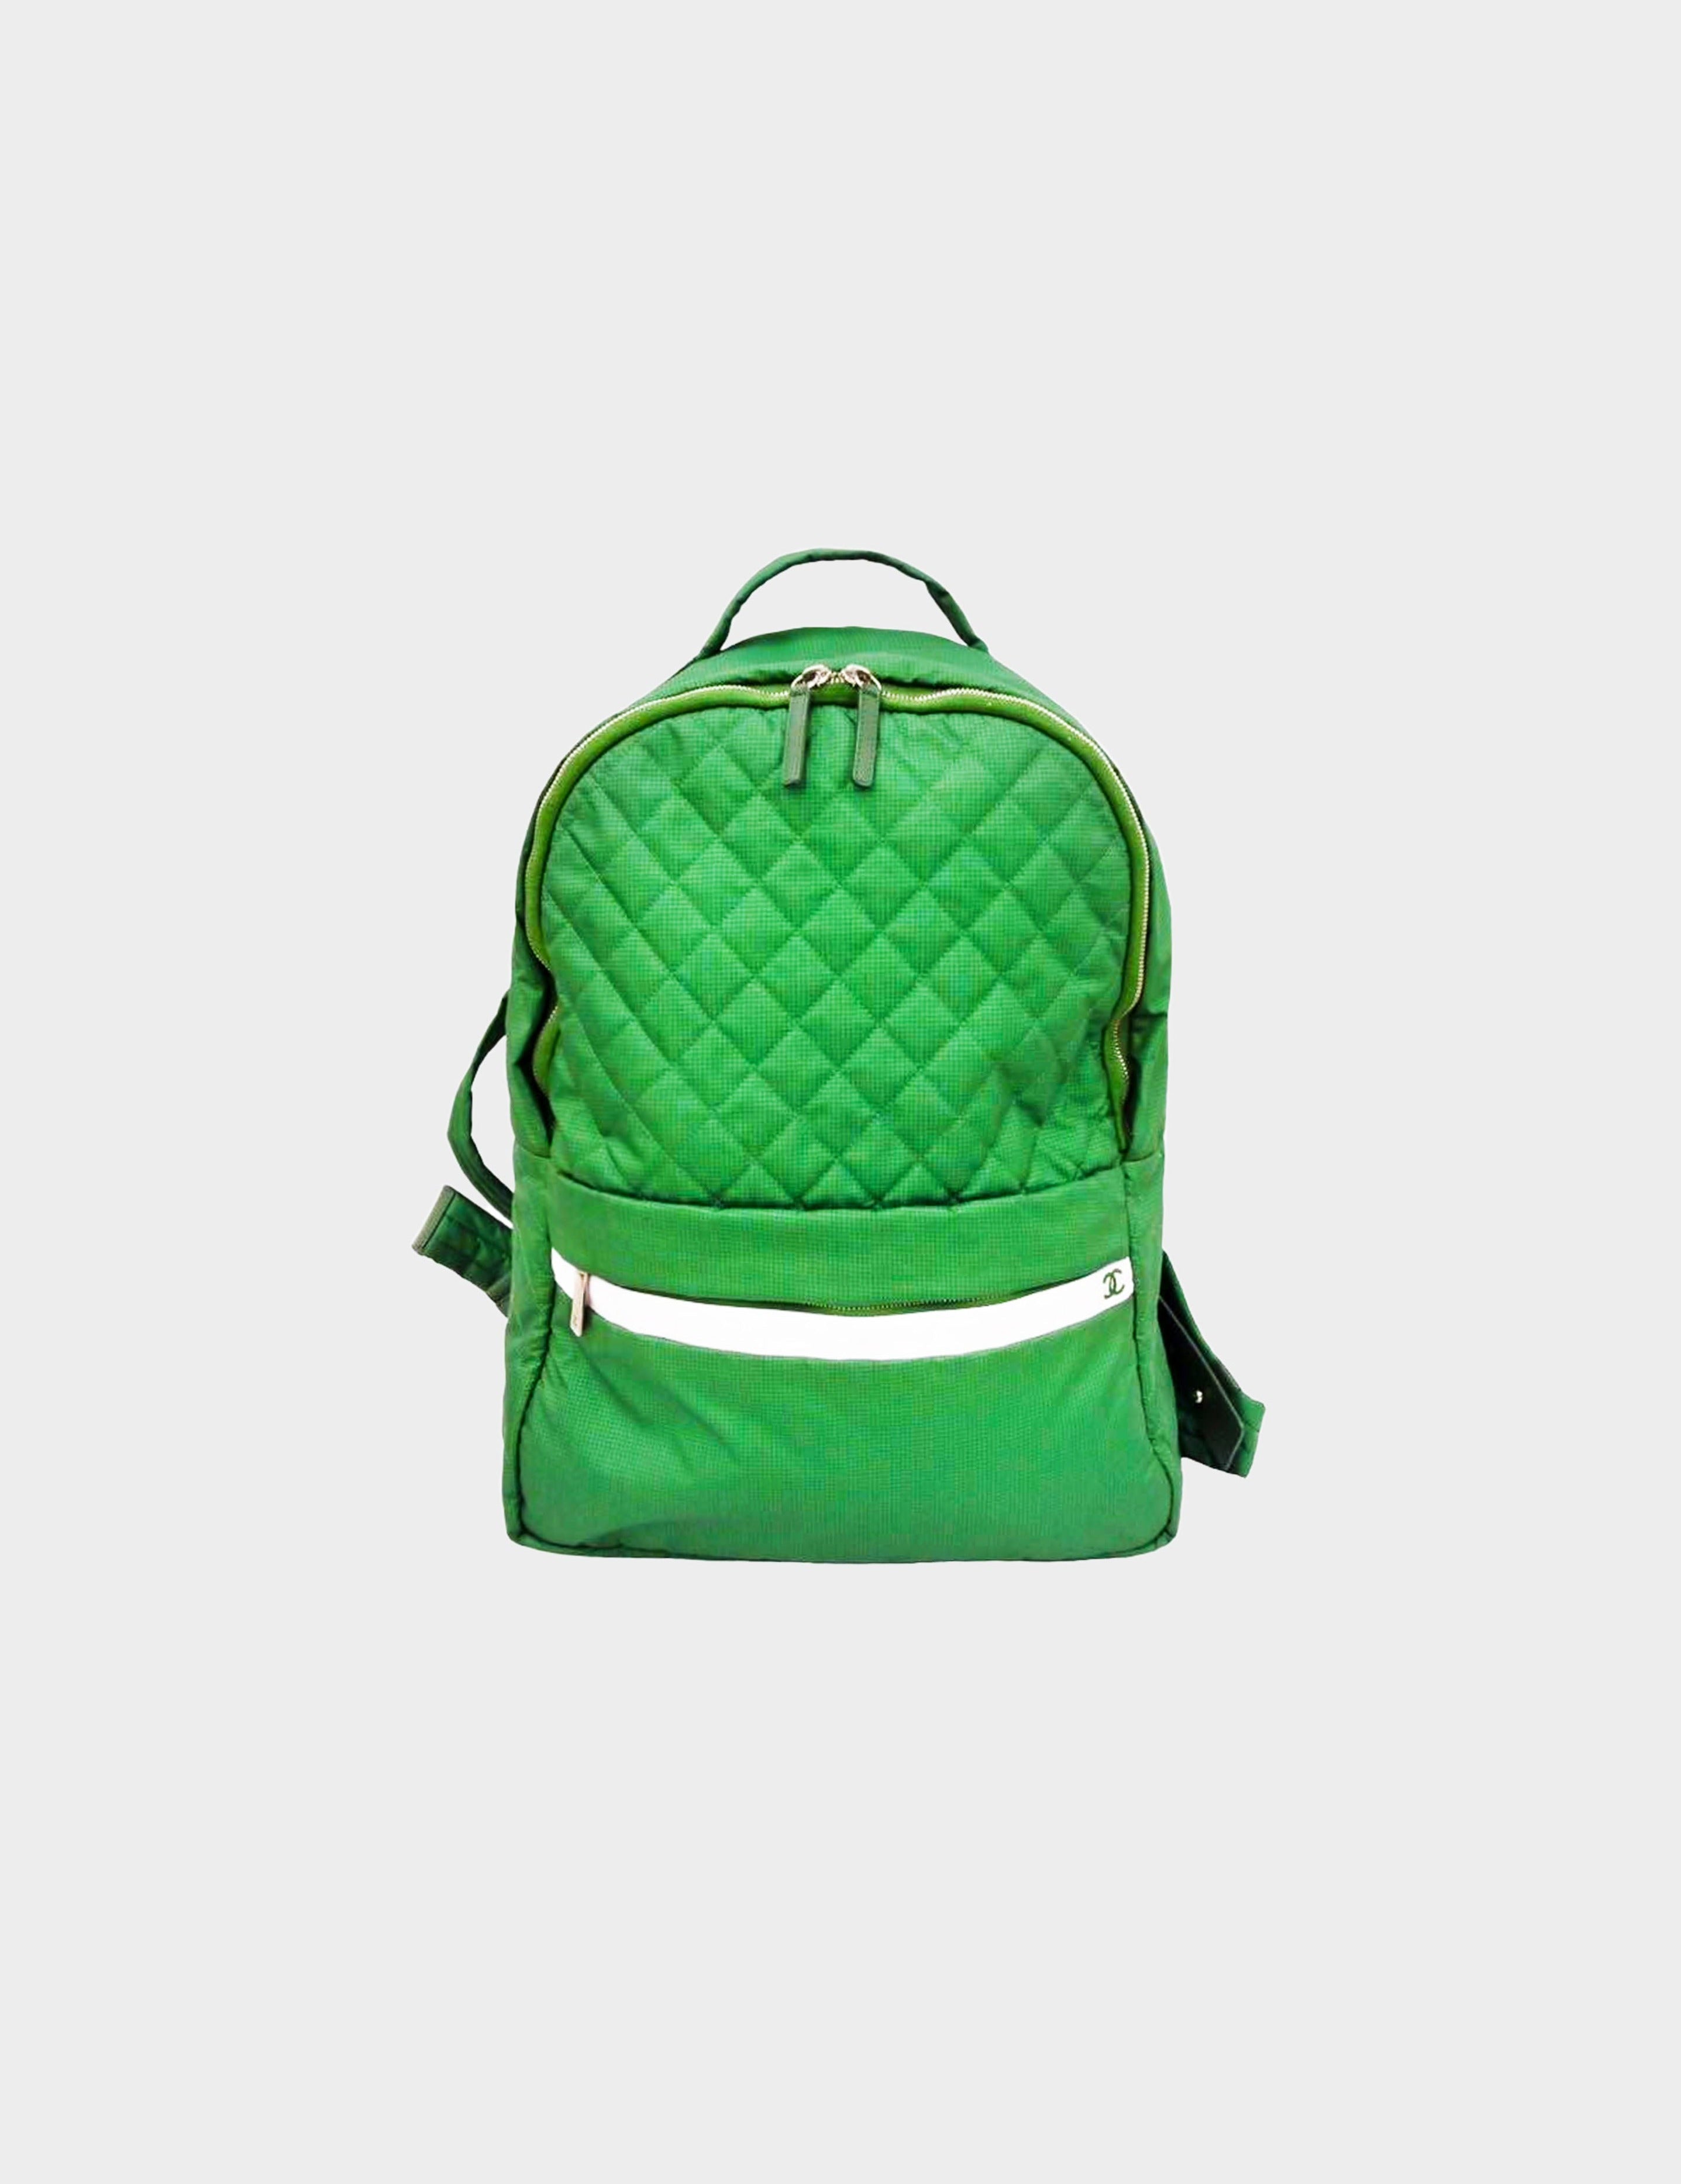 Chanel 2014-2015 Green Nylon Backpack · INTO